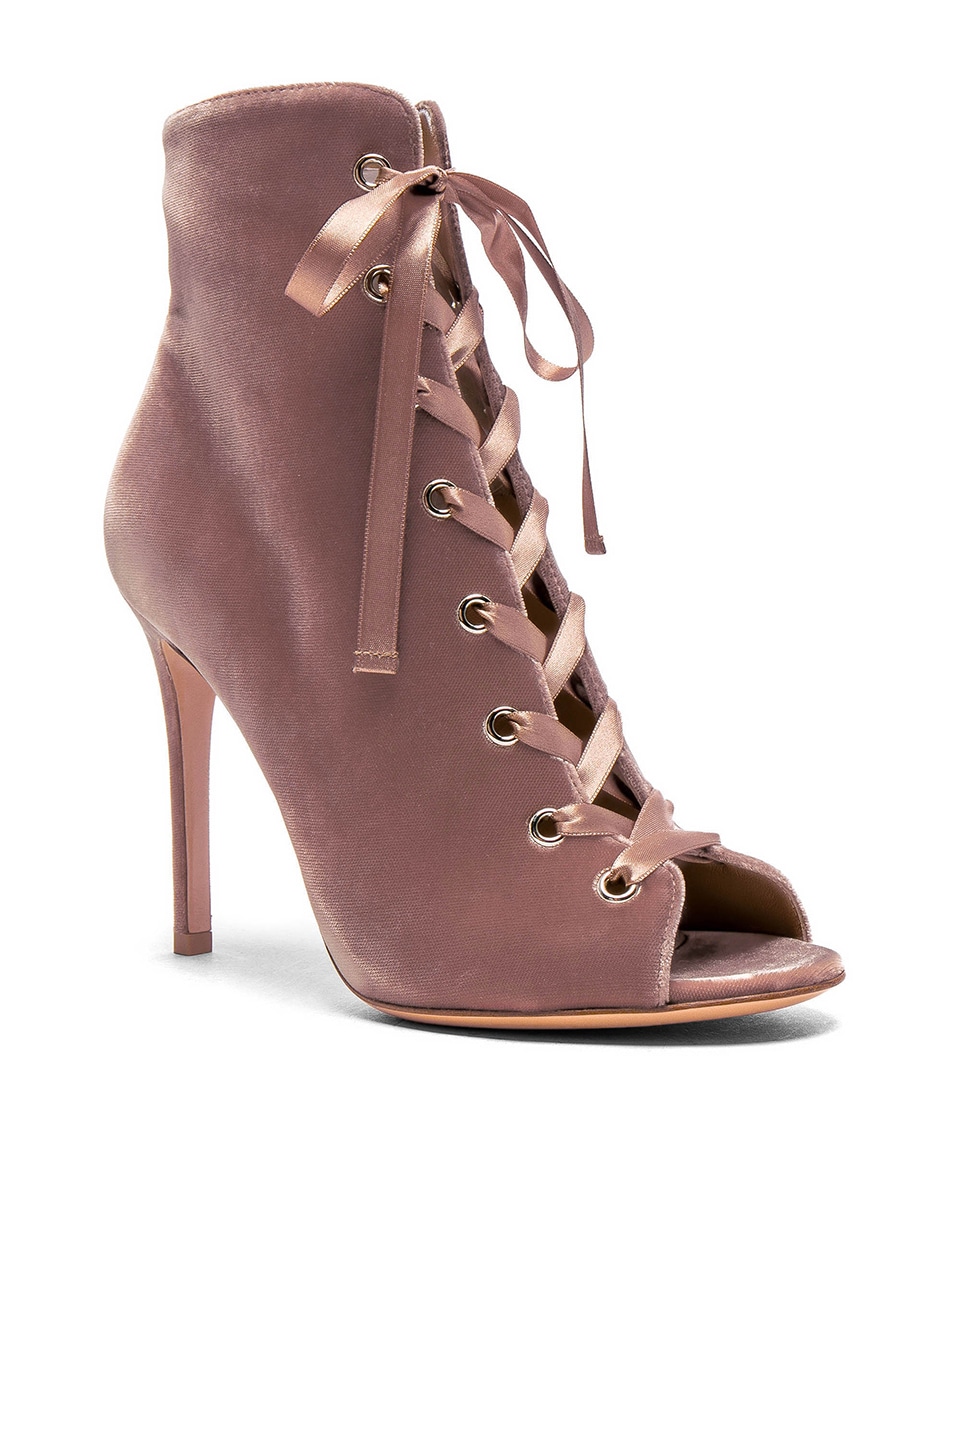 Gianvito Rossi For Fwrd Velvet Marie Lace Up Booties In Pink | ModeSens